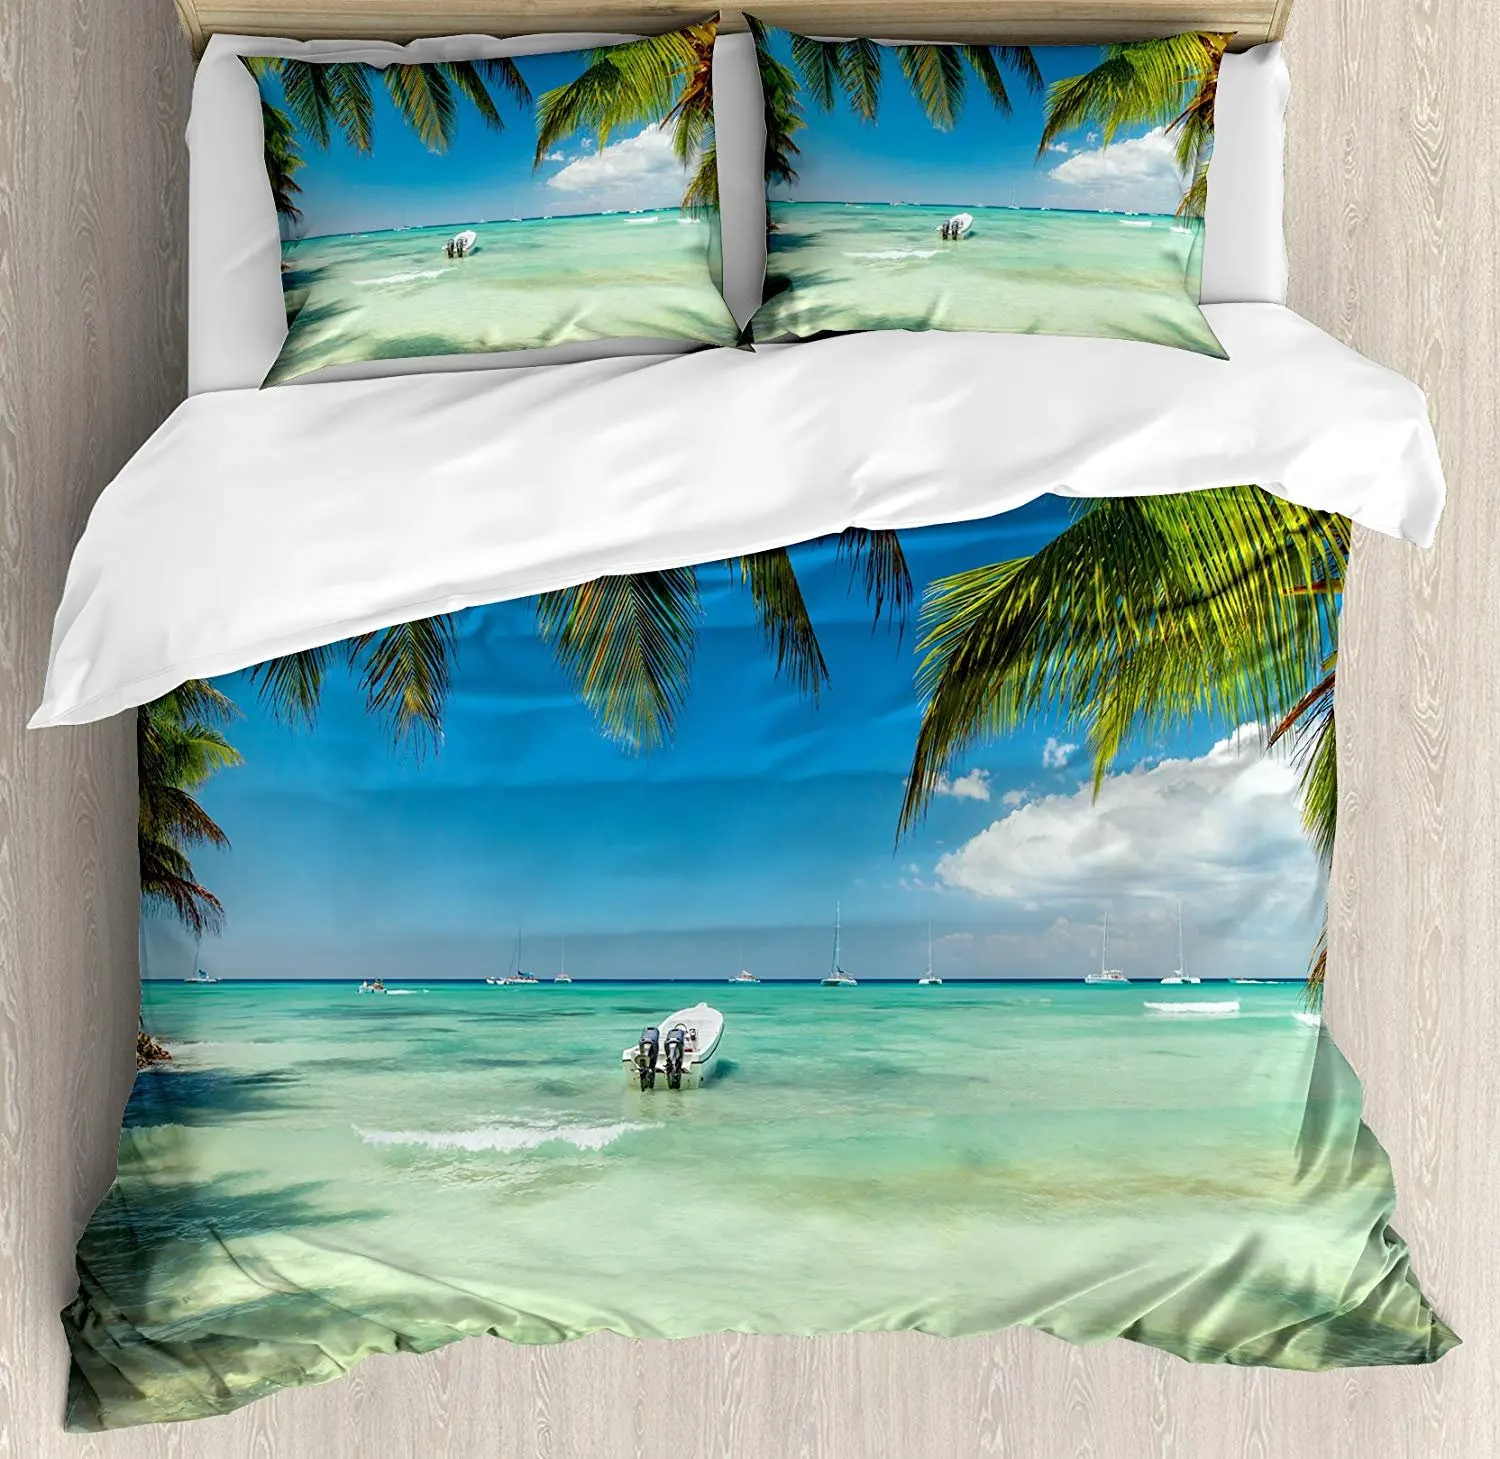 

Tropical Bedding Set Surreal Sea Surrounded by Palm Tree Leaves Scenic Nature Summertime Duvet Cover Set Pillowcase for Home